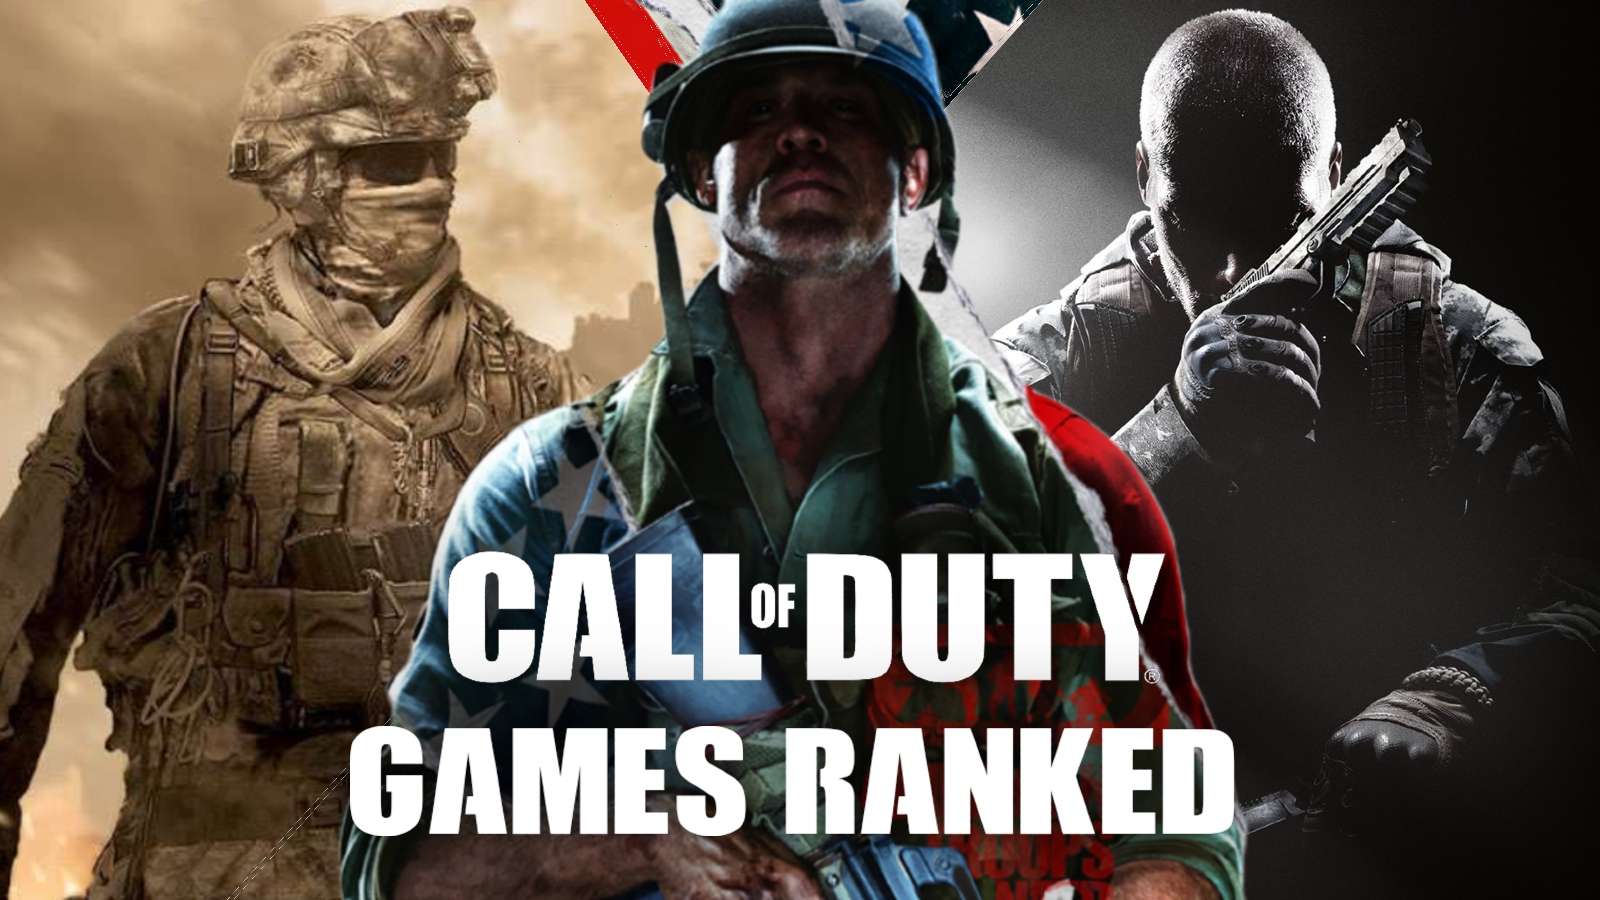 Call of Duty games ranked Modern Warfare 2, Black Ops 2, Black Ops Cold War